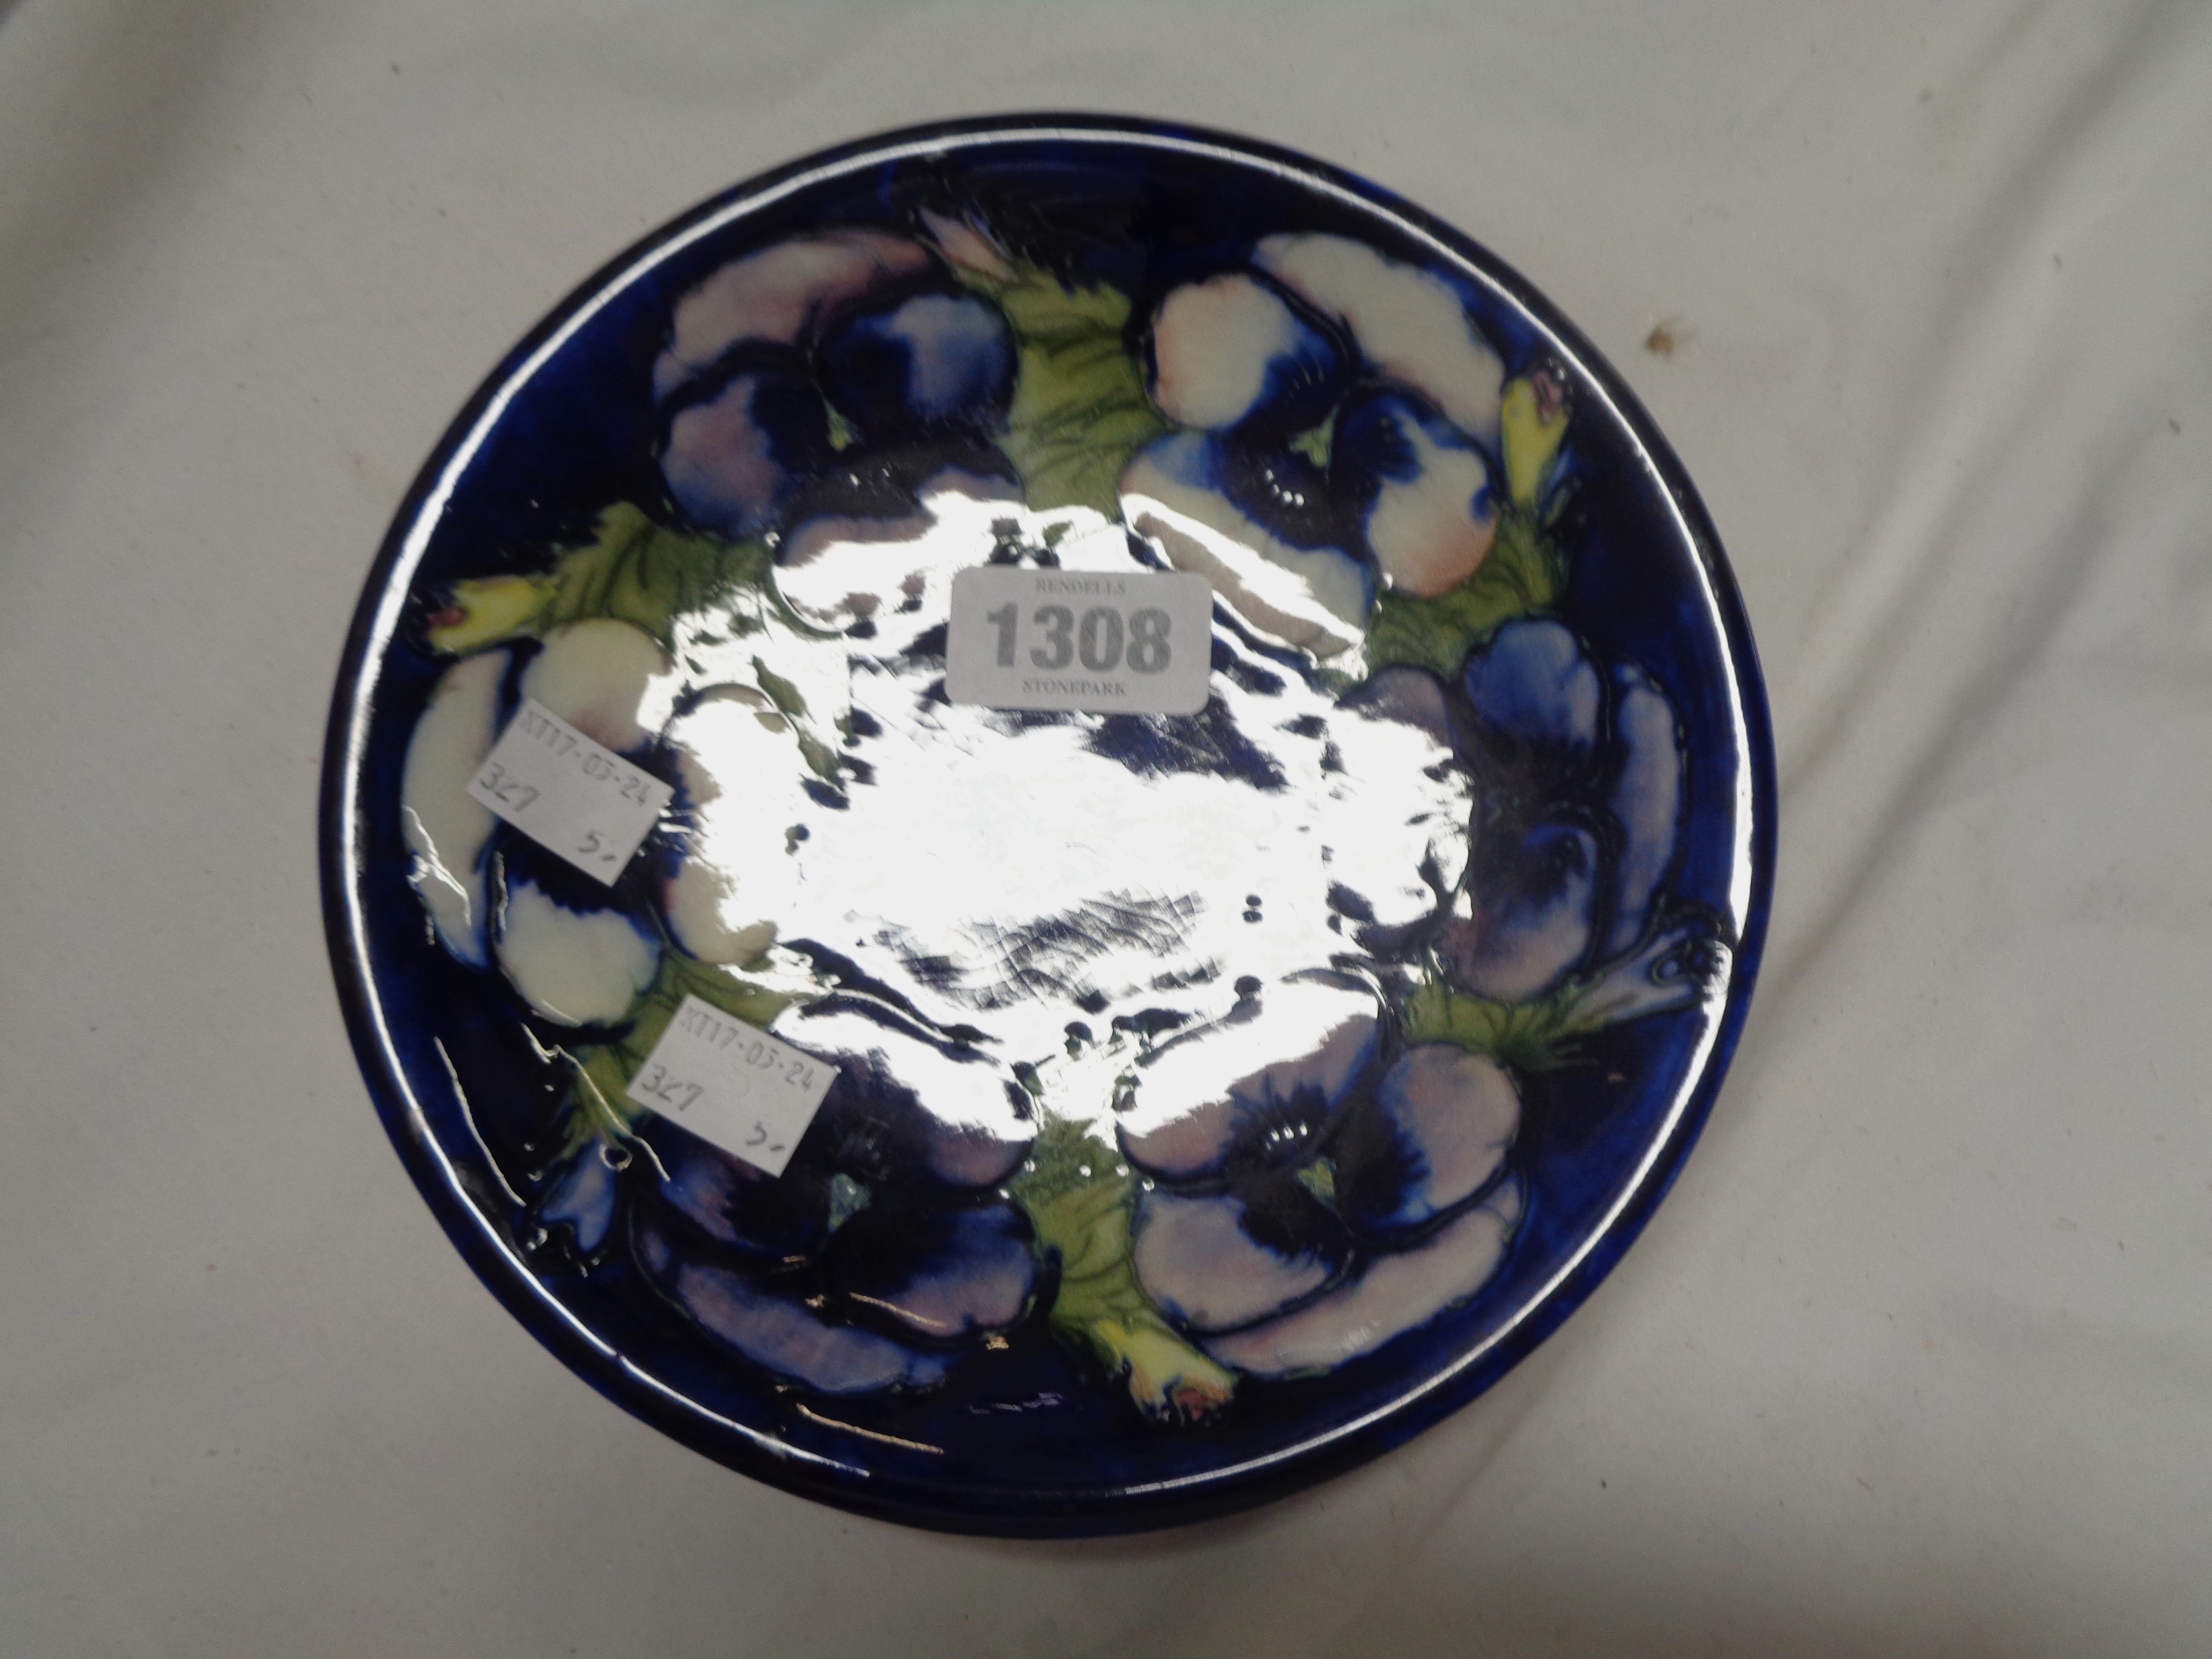 A Moorcroft pottery plate, decorated with a tube-lined floral pattern on a blue ground - chip to